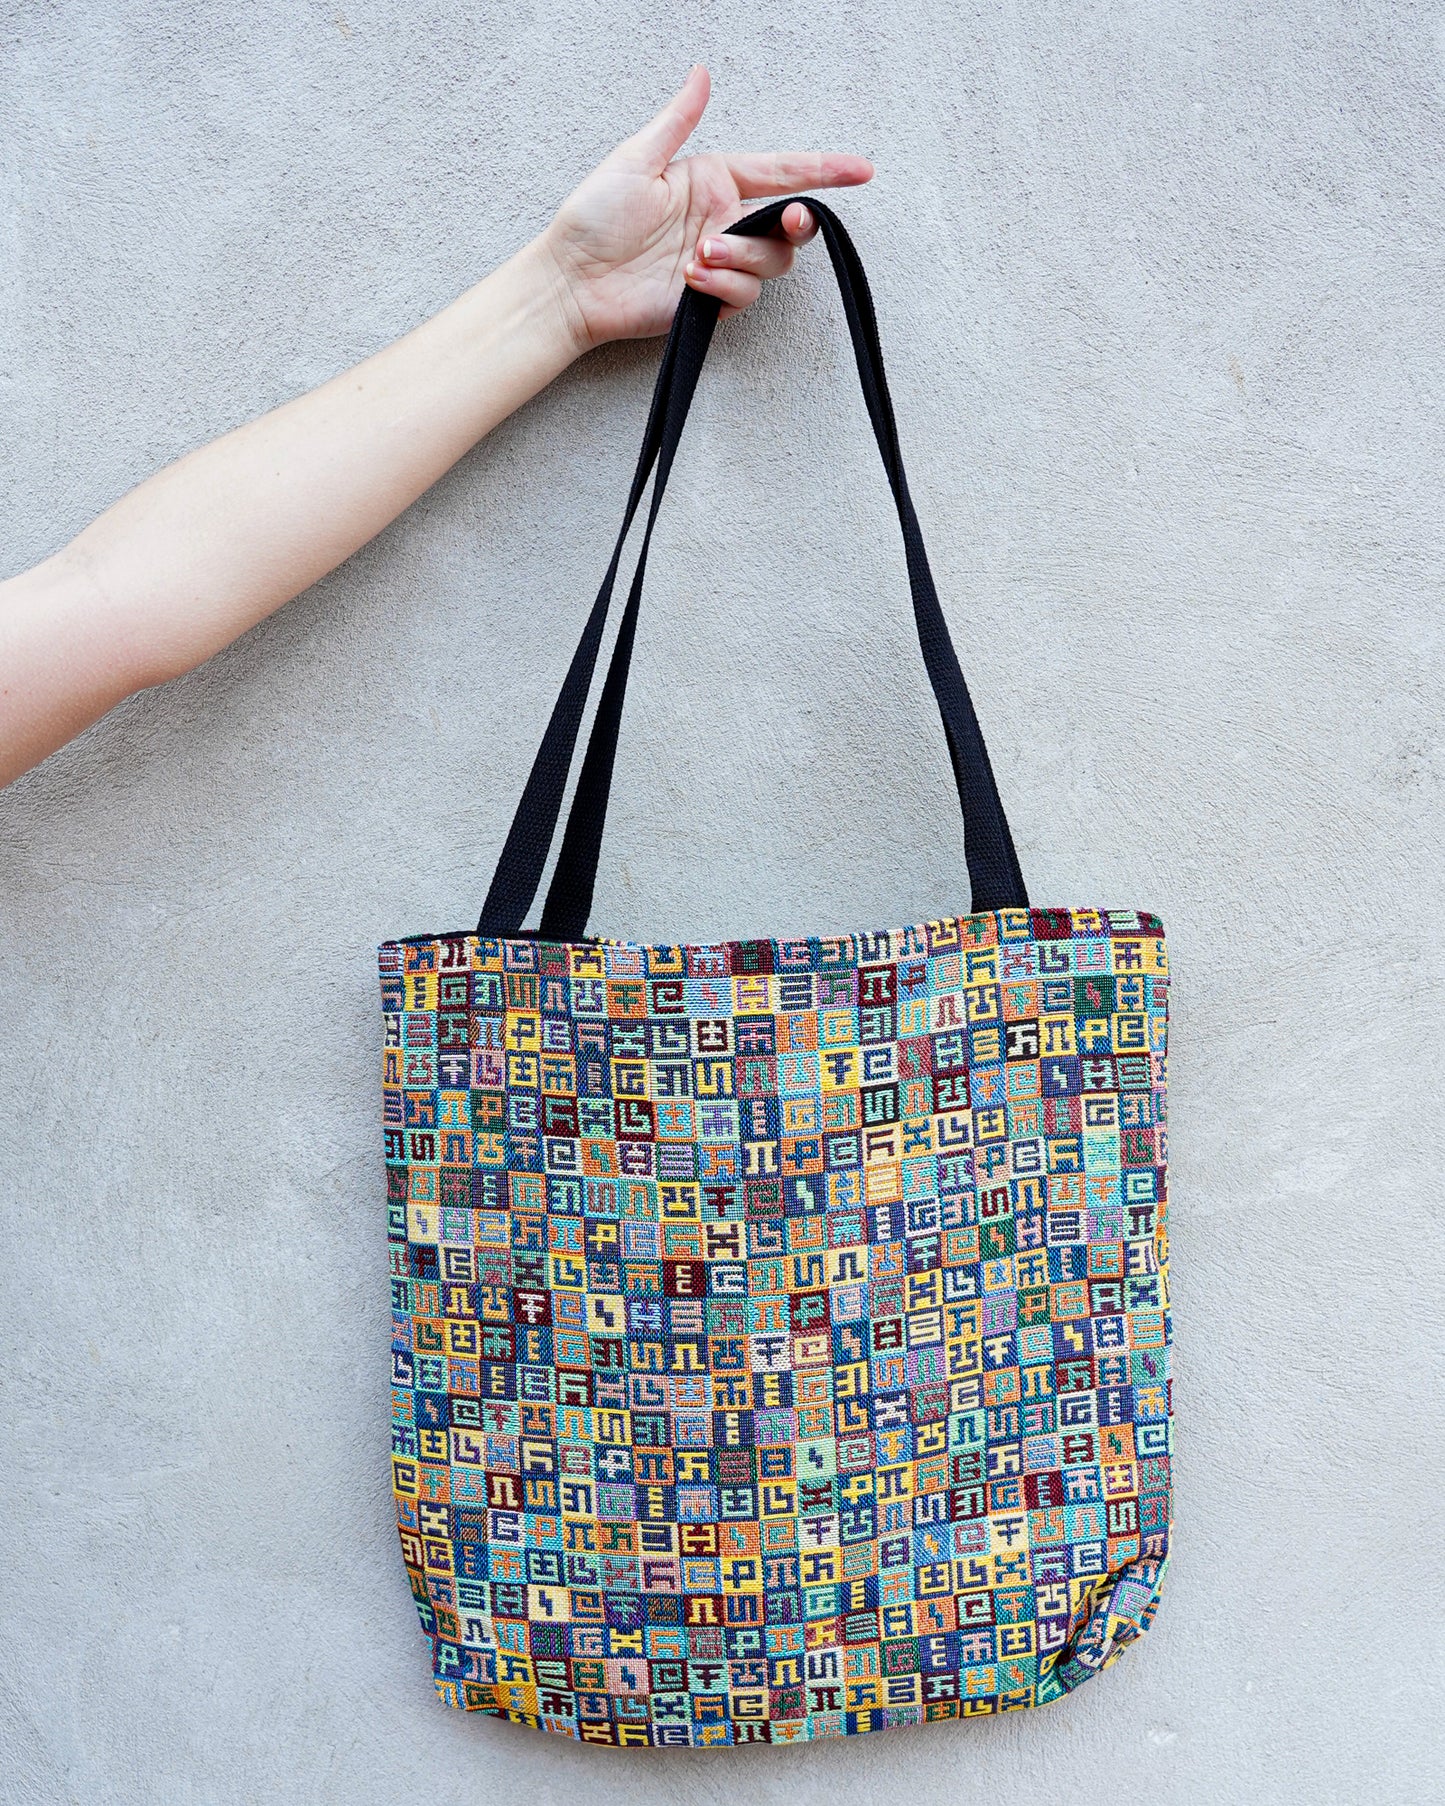 Complementary Planned Randomness - Woven Tote